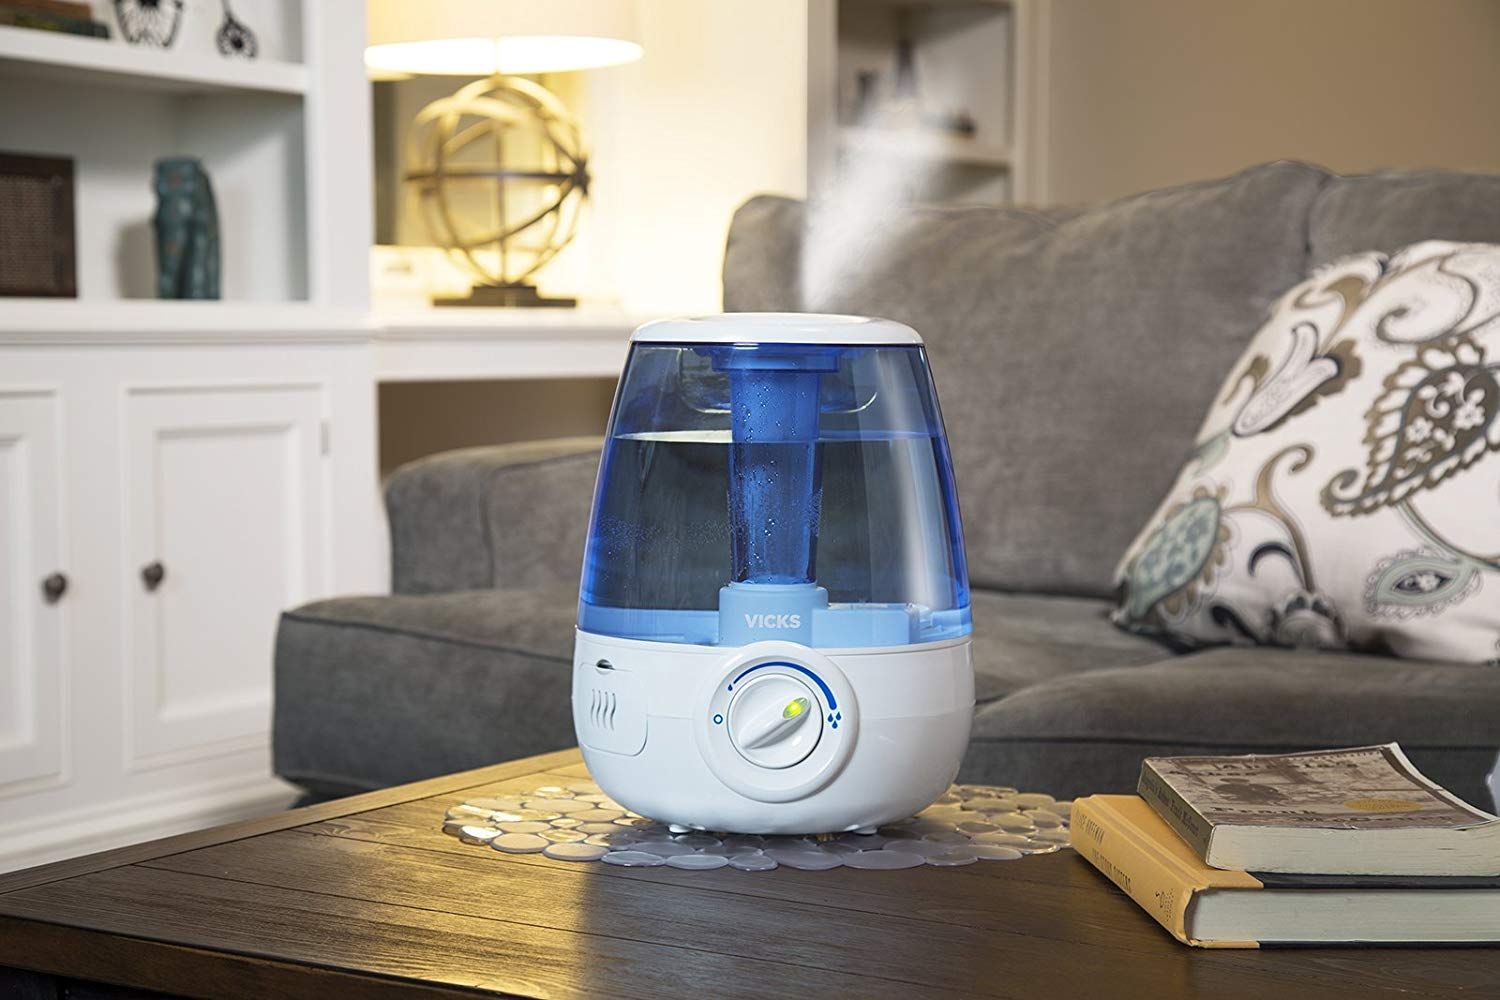 best humidifier for dry air